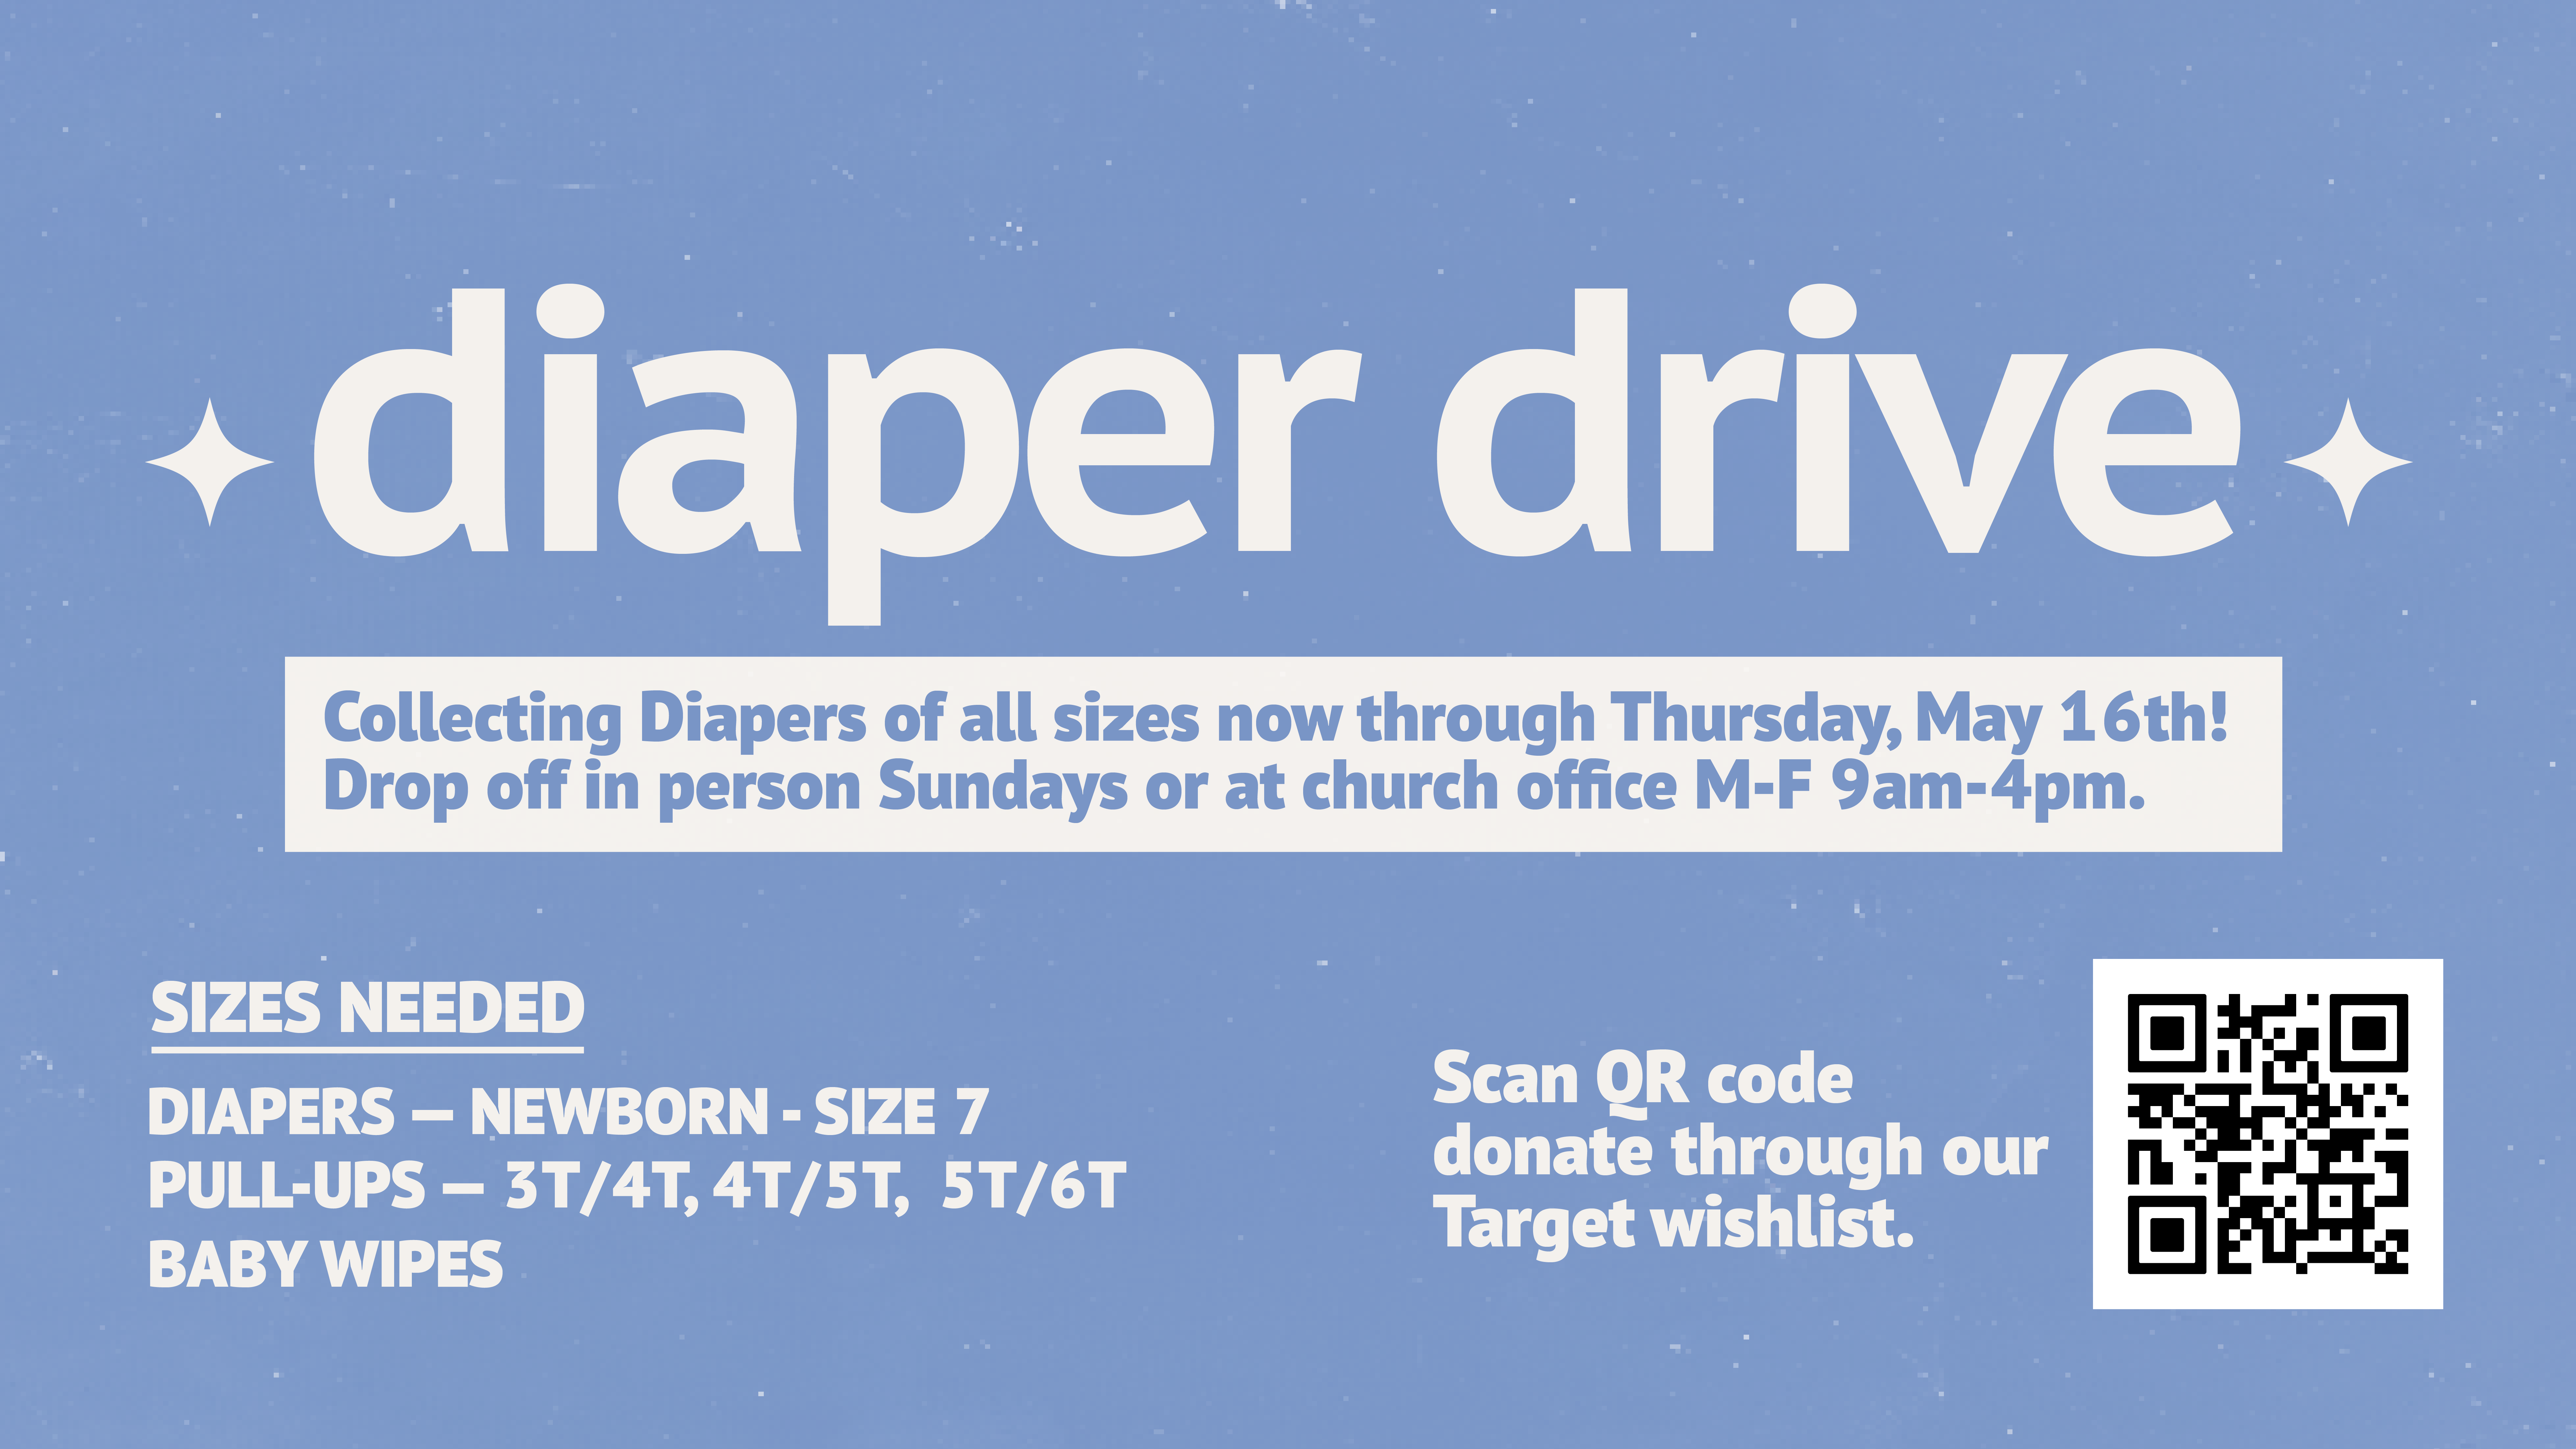 DIAPER DRIVE at the Orange County campus